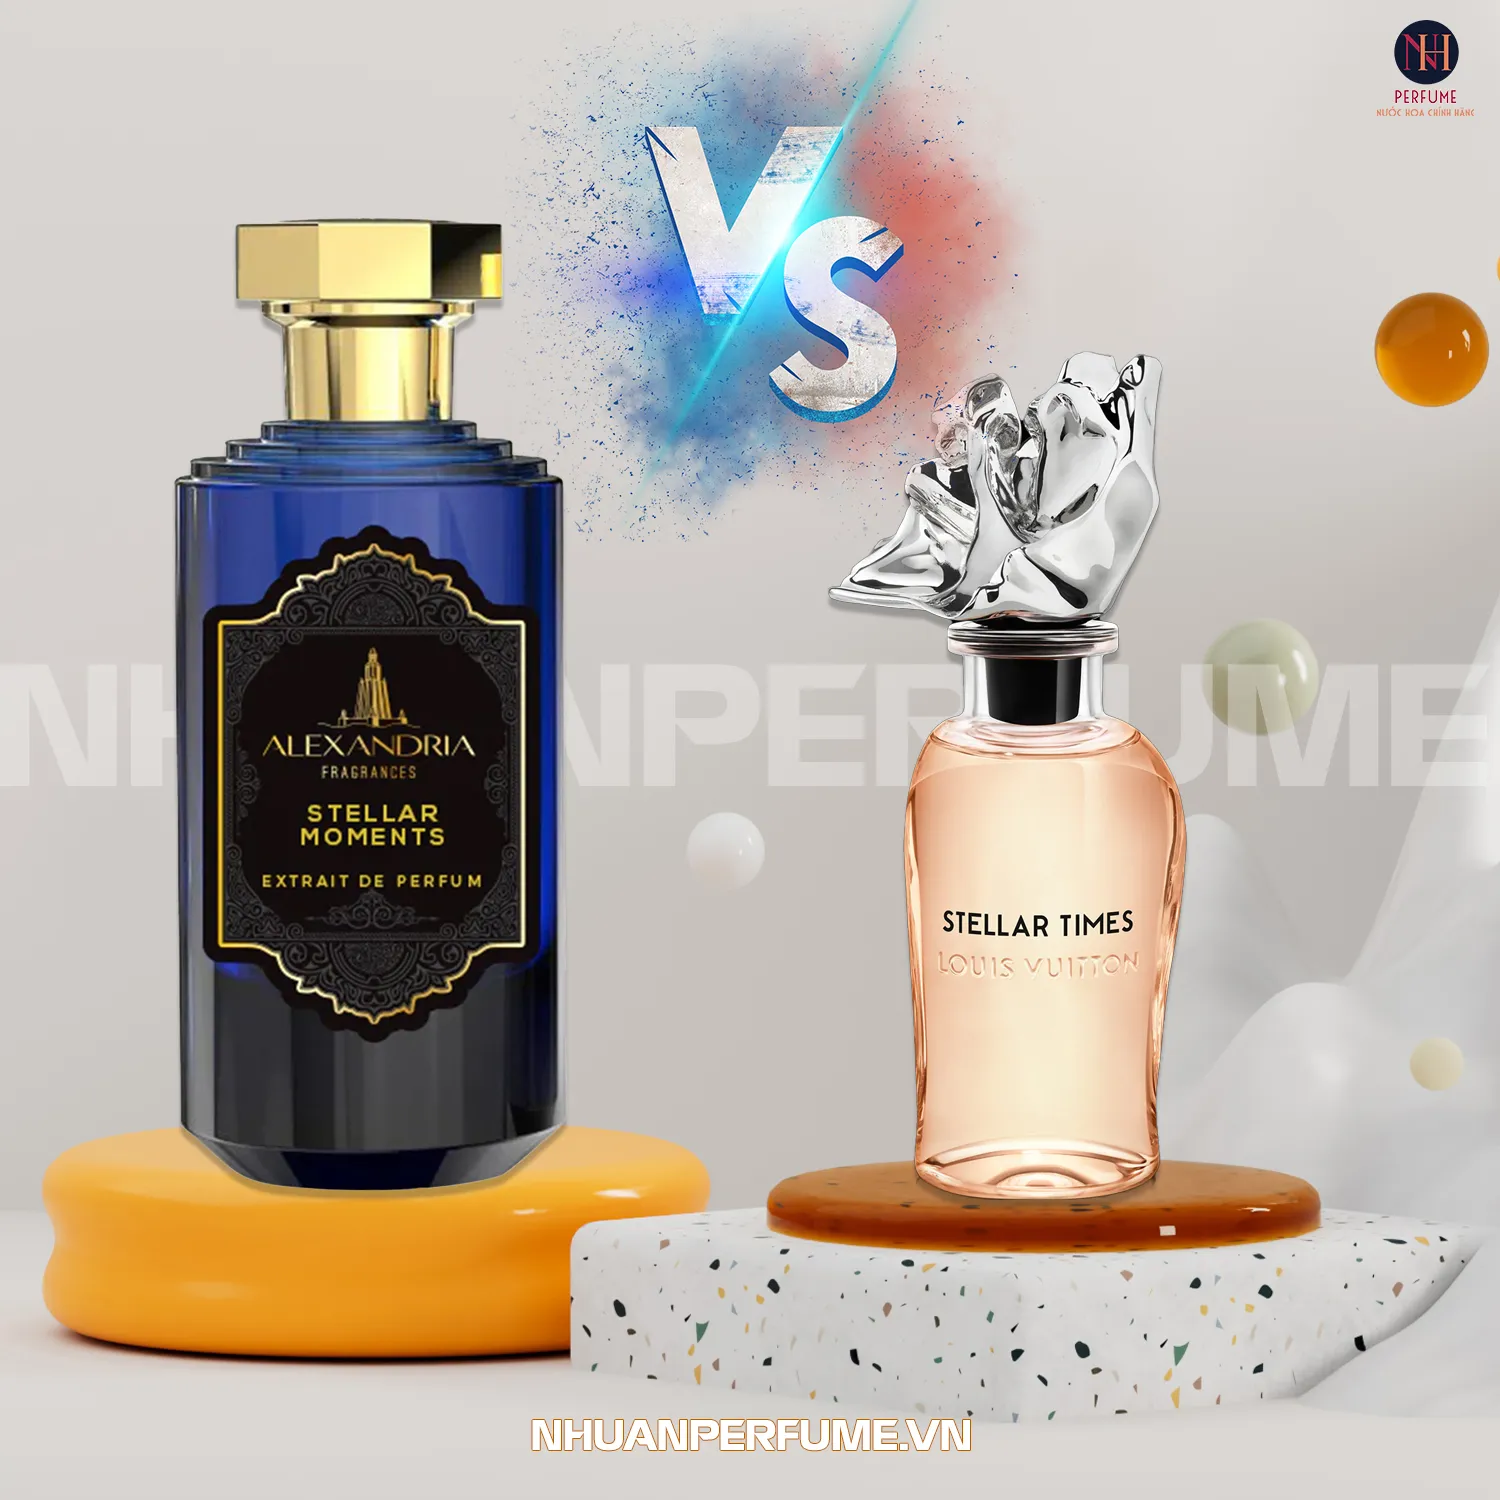 New Arrival! Stellar Moments Inspired by Louis Vuitton Stellar Times -  Alexandria Fragrances